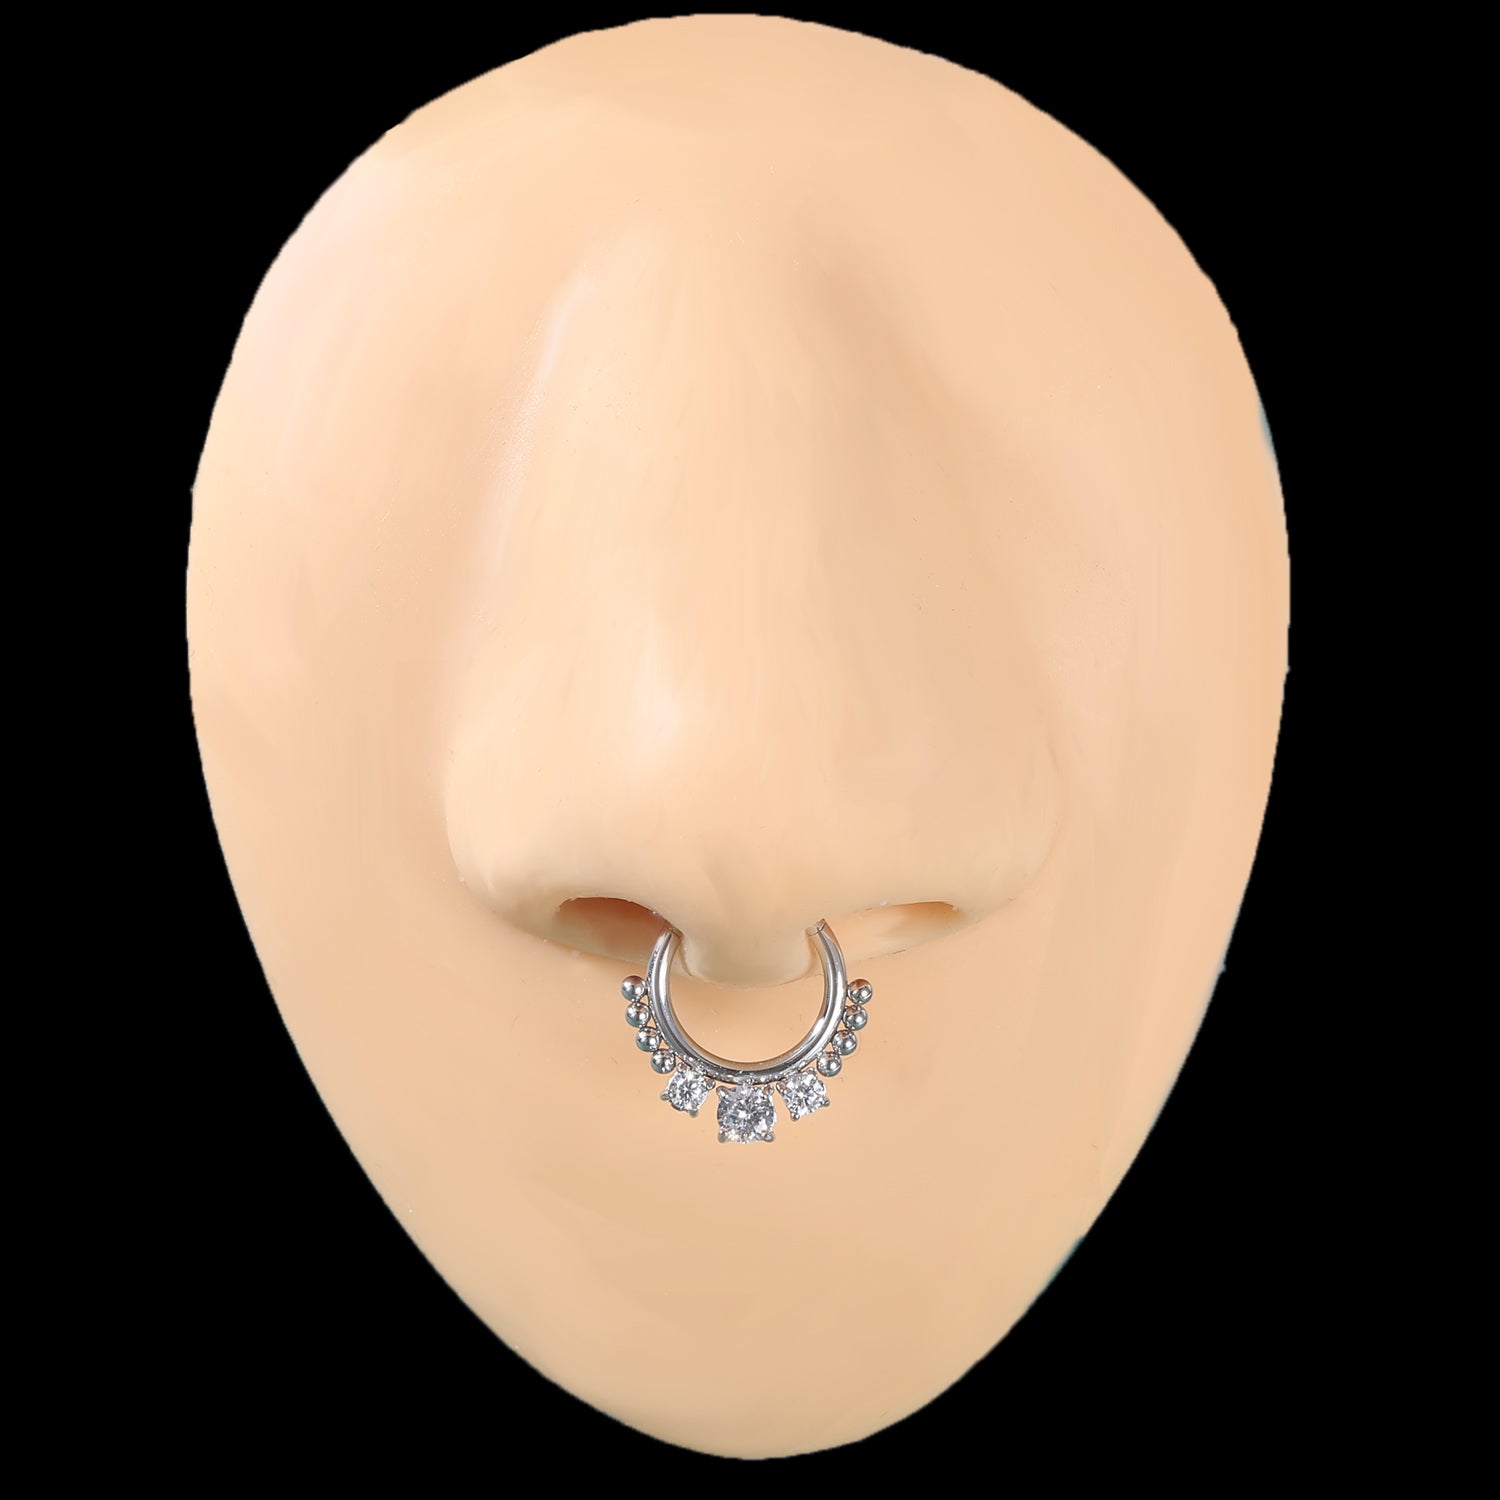 16g-crystal-nose-septum-ring-stainless-steel-ball-clicker-cartilage-helix-piercing